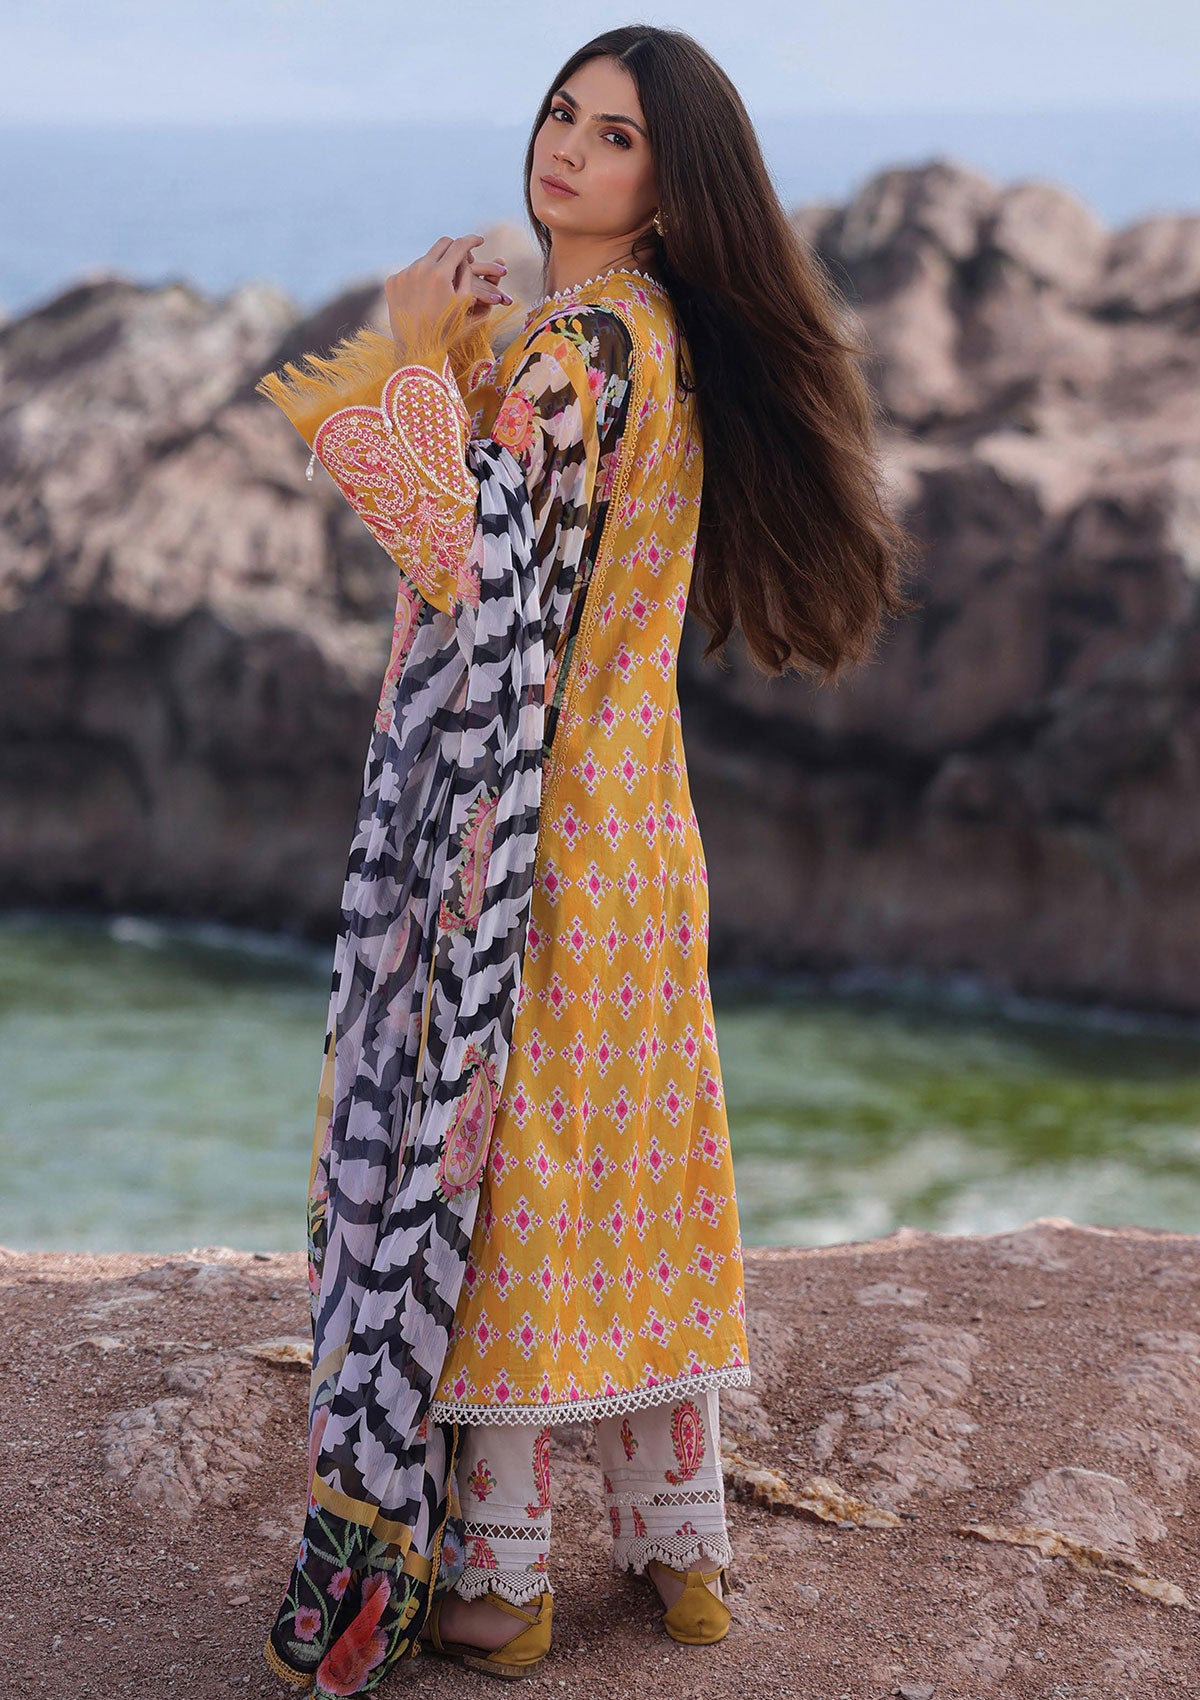 Lawn Collection - Ayzel - Tropicana - AZL#10 - MELINE